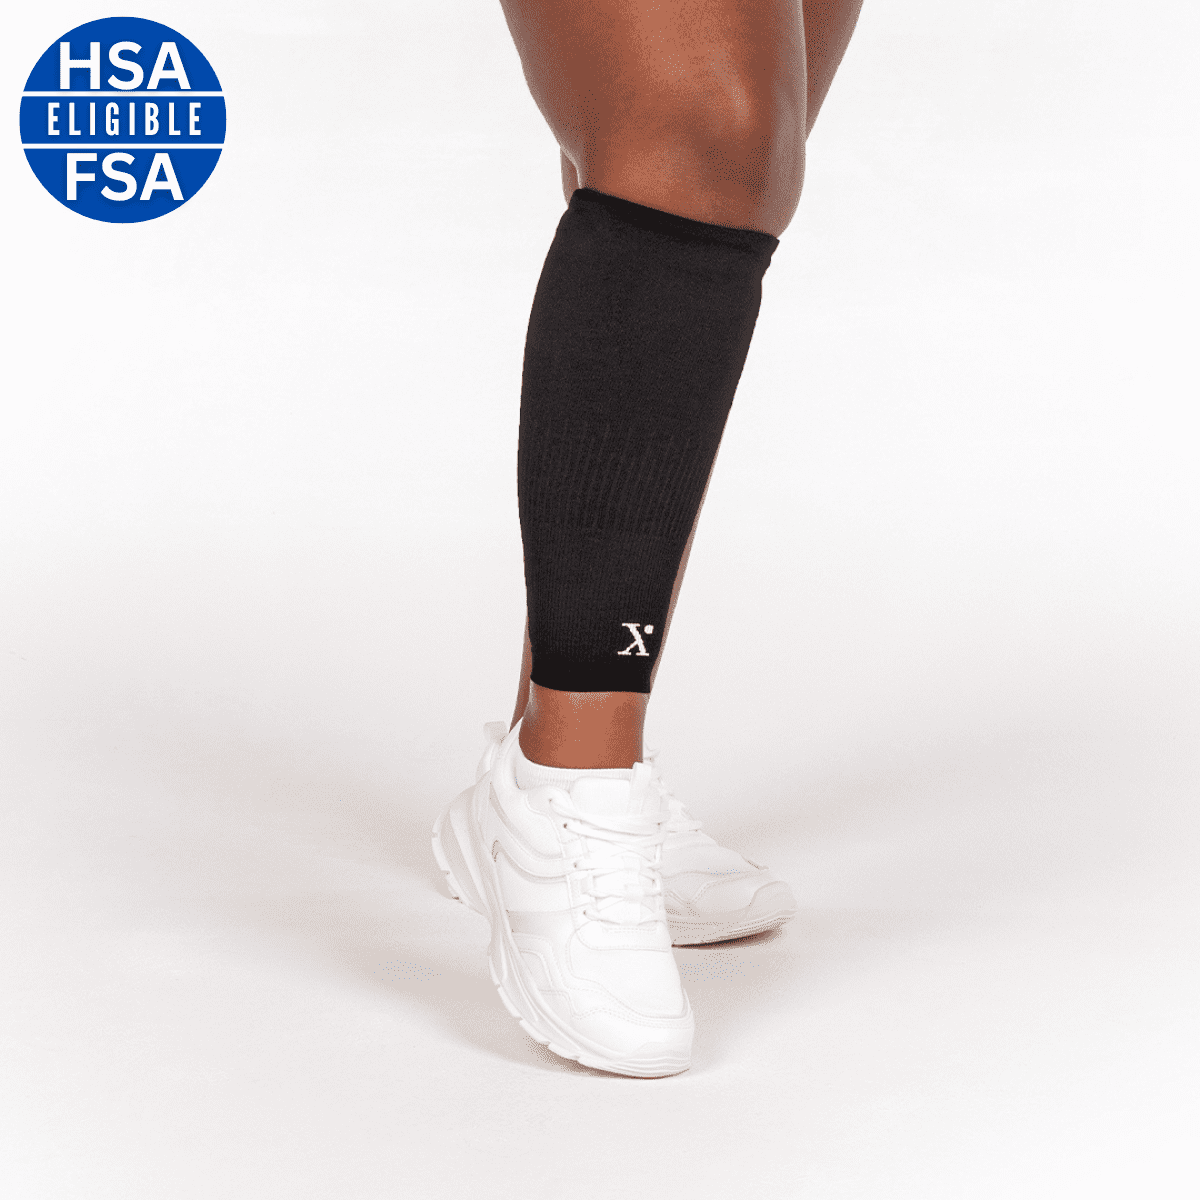 1pc Calf Compression Sleeves for Men & Women - Leg and Shin Compression  Sleeves for Runners, Cyclist - Shin Splint, Blood Circulation and Recovery  Aid 